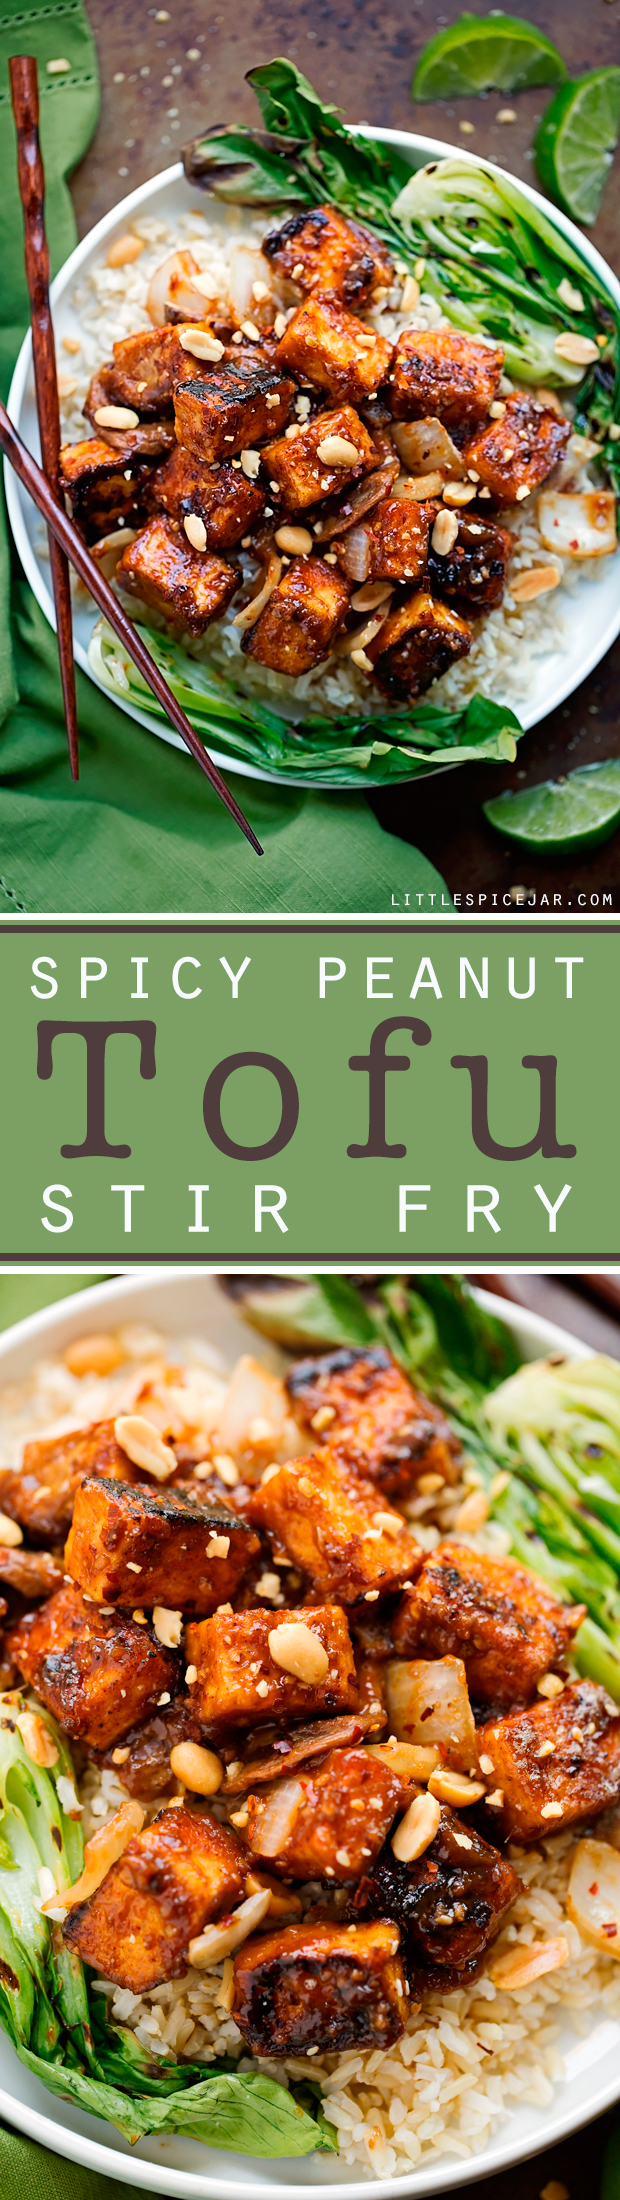 Spicy Peanut Tofu Stir Fry - Loaded with flavor and it's vegetarian/vegan/gluten free friendly! #glutenfree #stirfry #tofustirfry #veggiestirfry | Littlespicejar.com